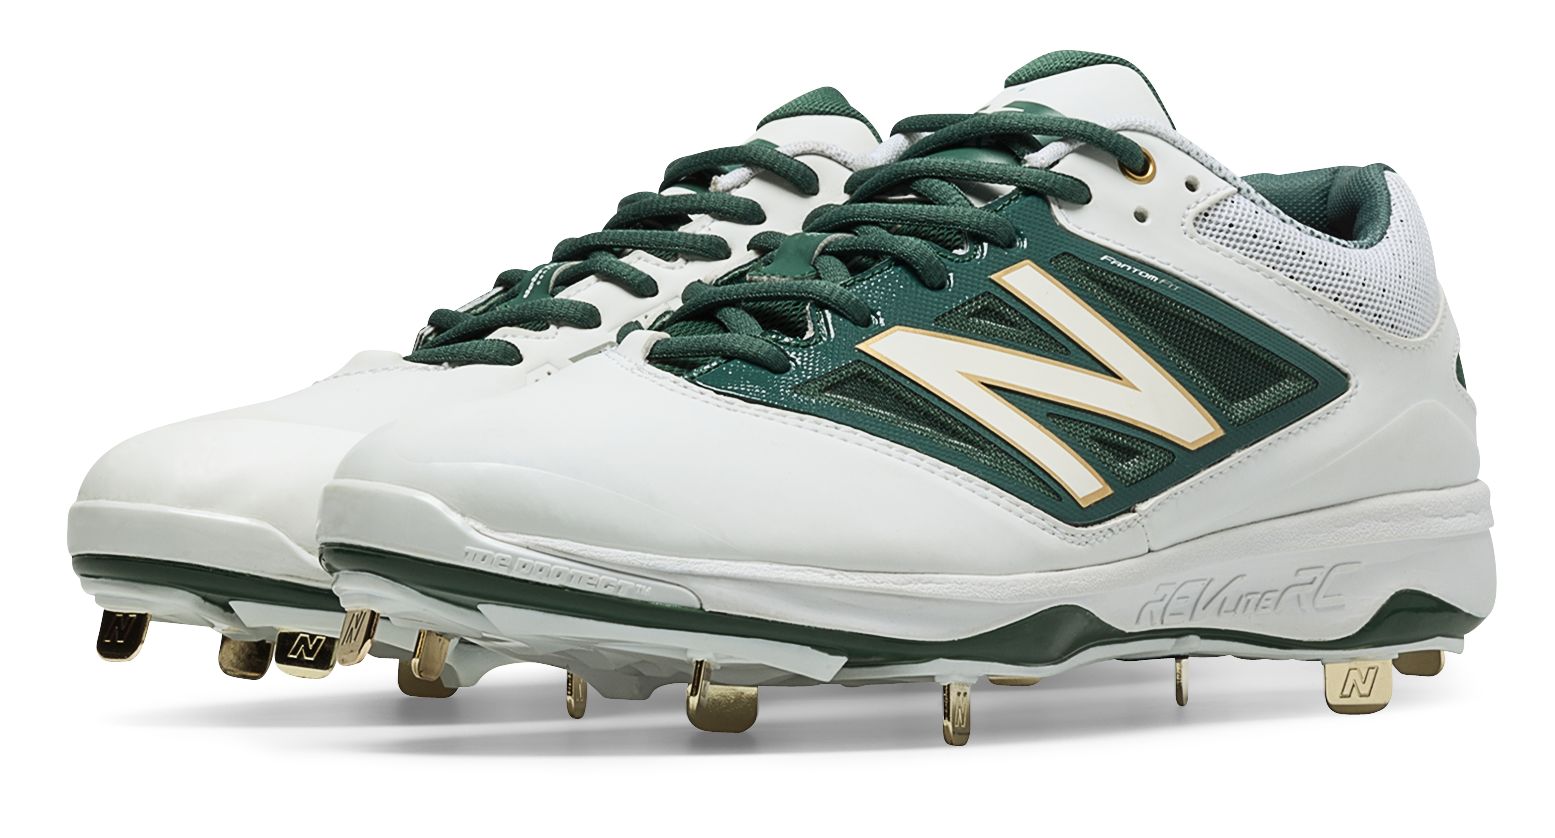 green and white new balance cleats